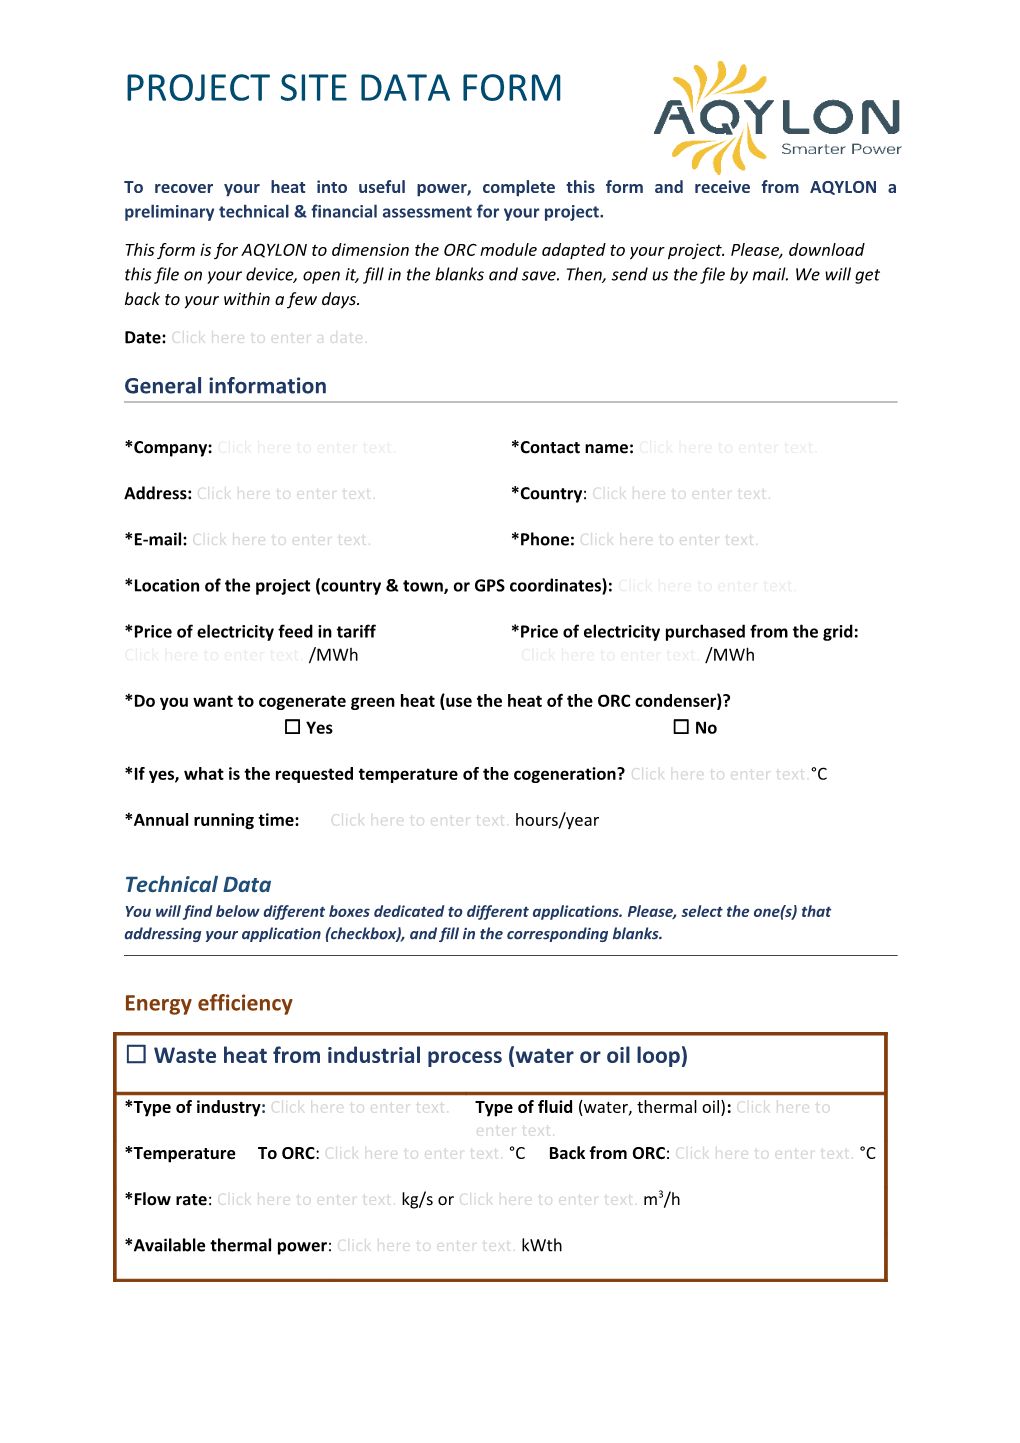 To Recover Your Heat Into Useful Power, Complete This Form and Receive from AQYLON